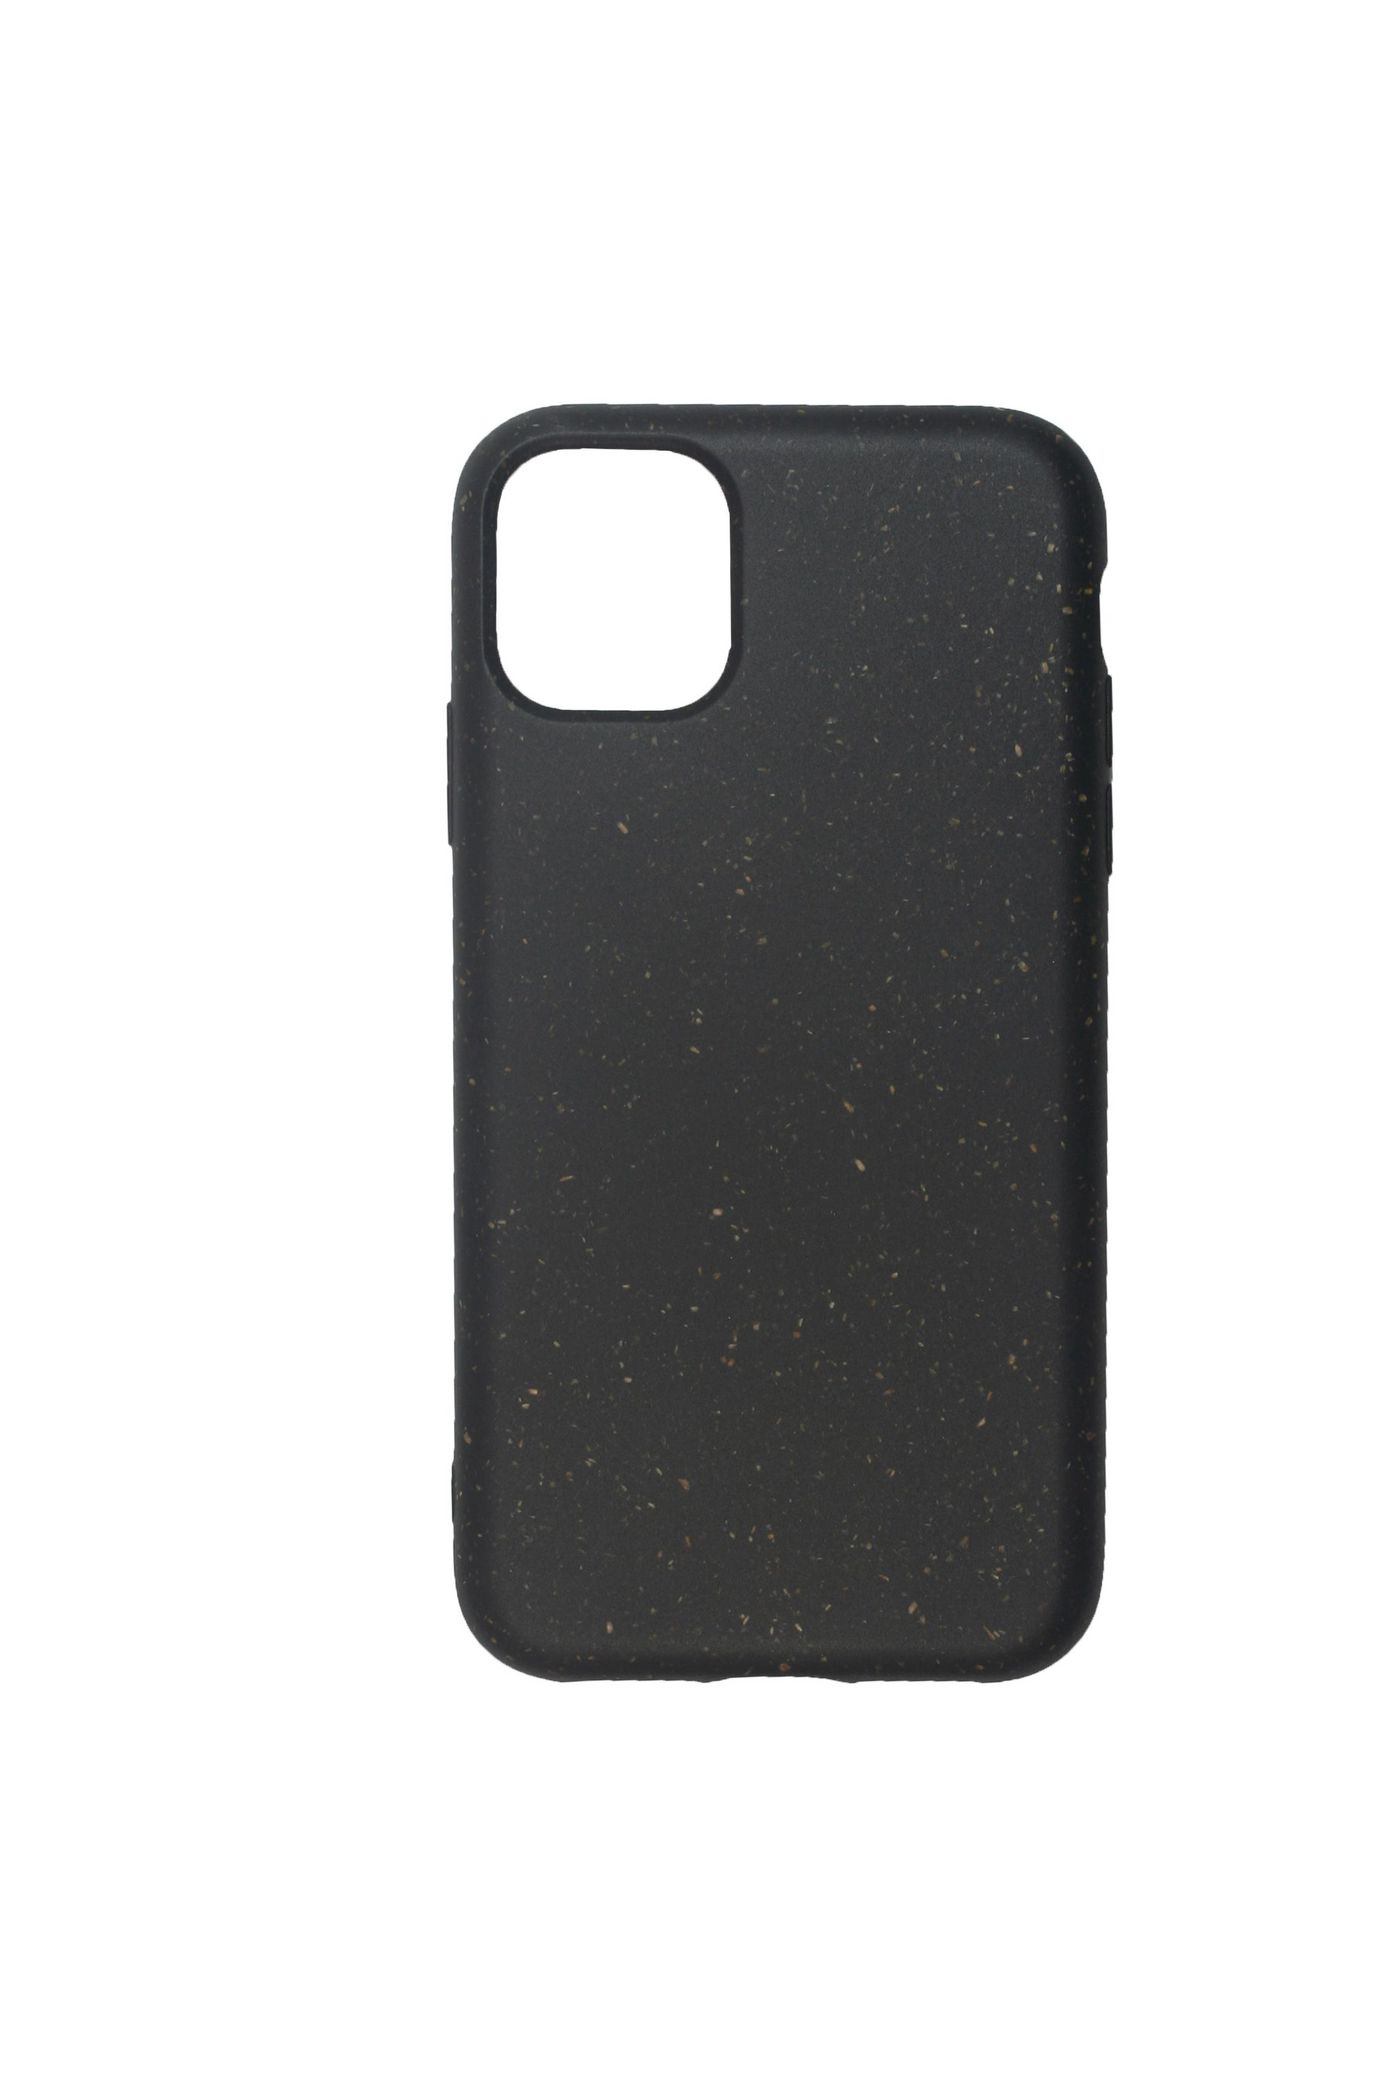 iPhone 11 Biodegradable Case With Antibacterial